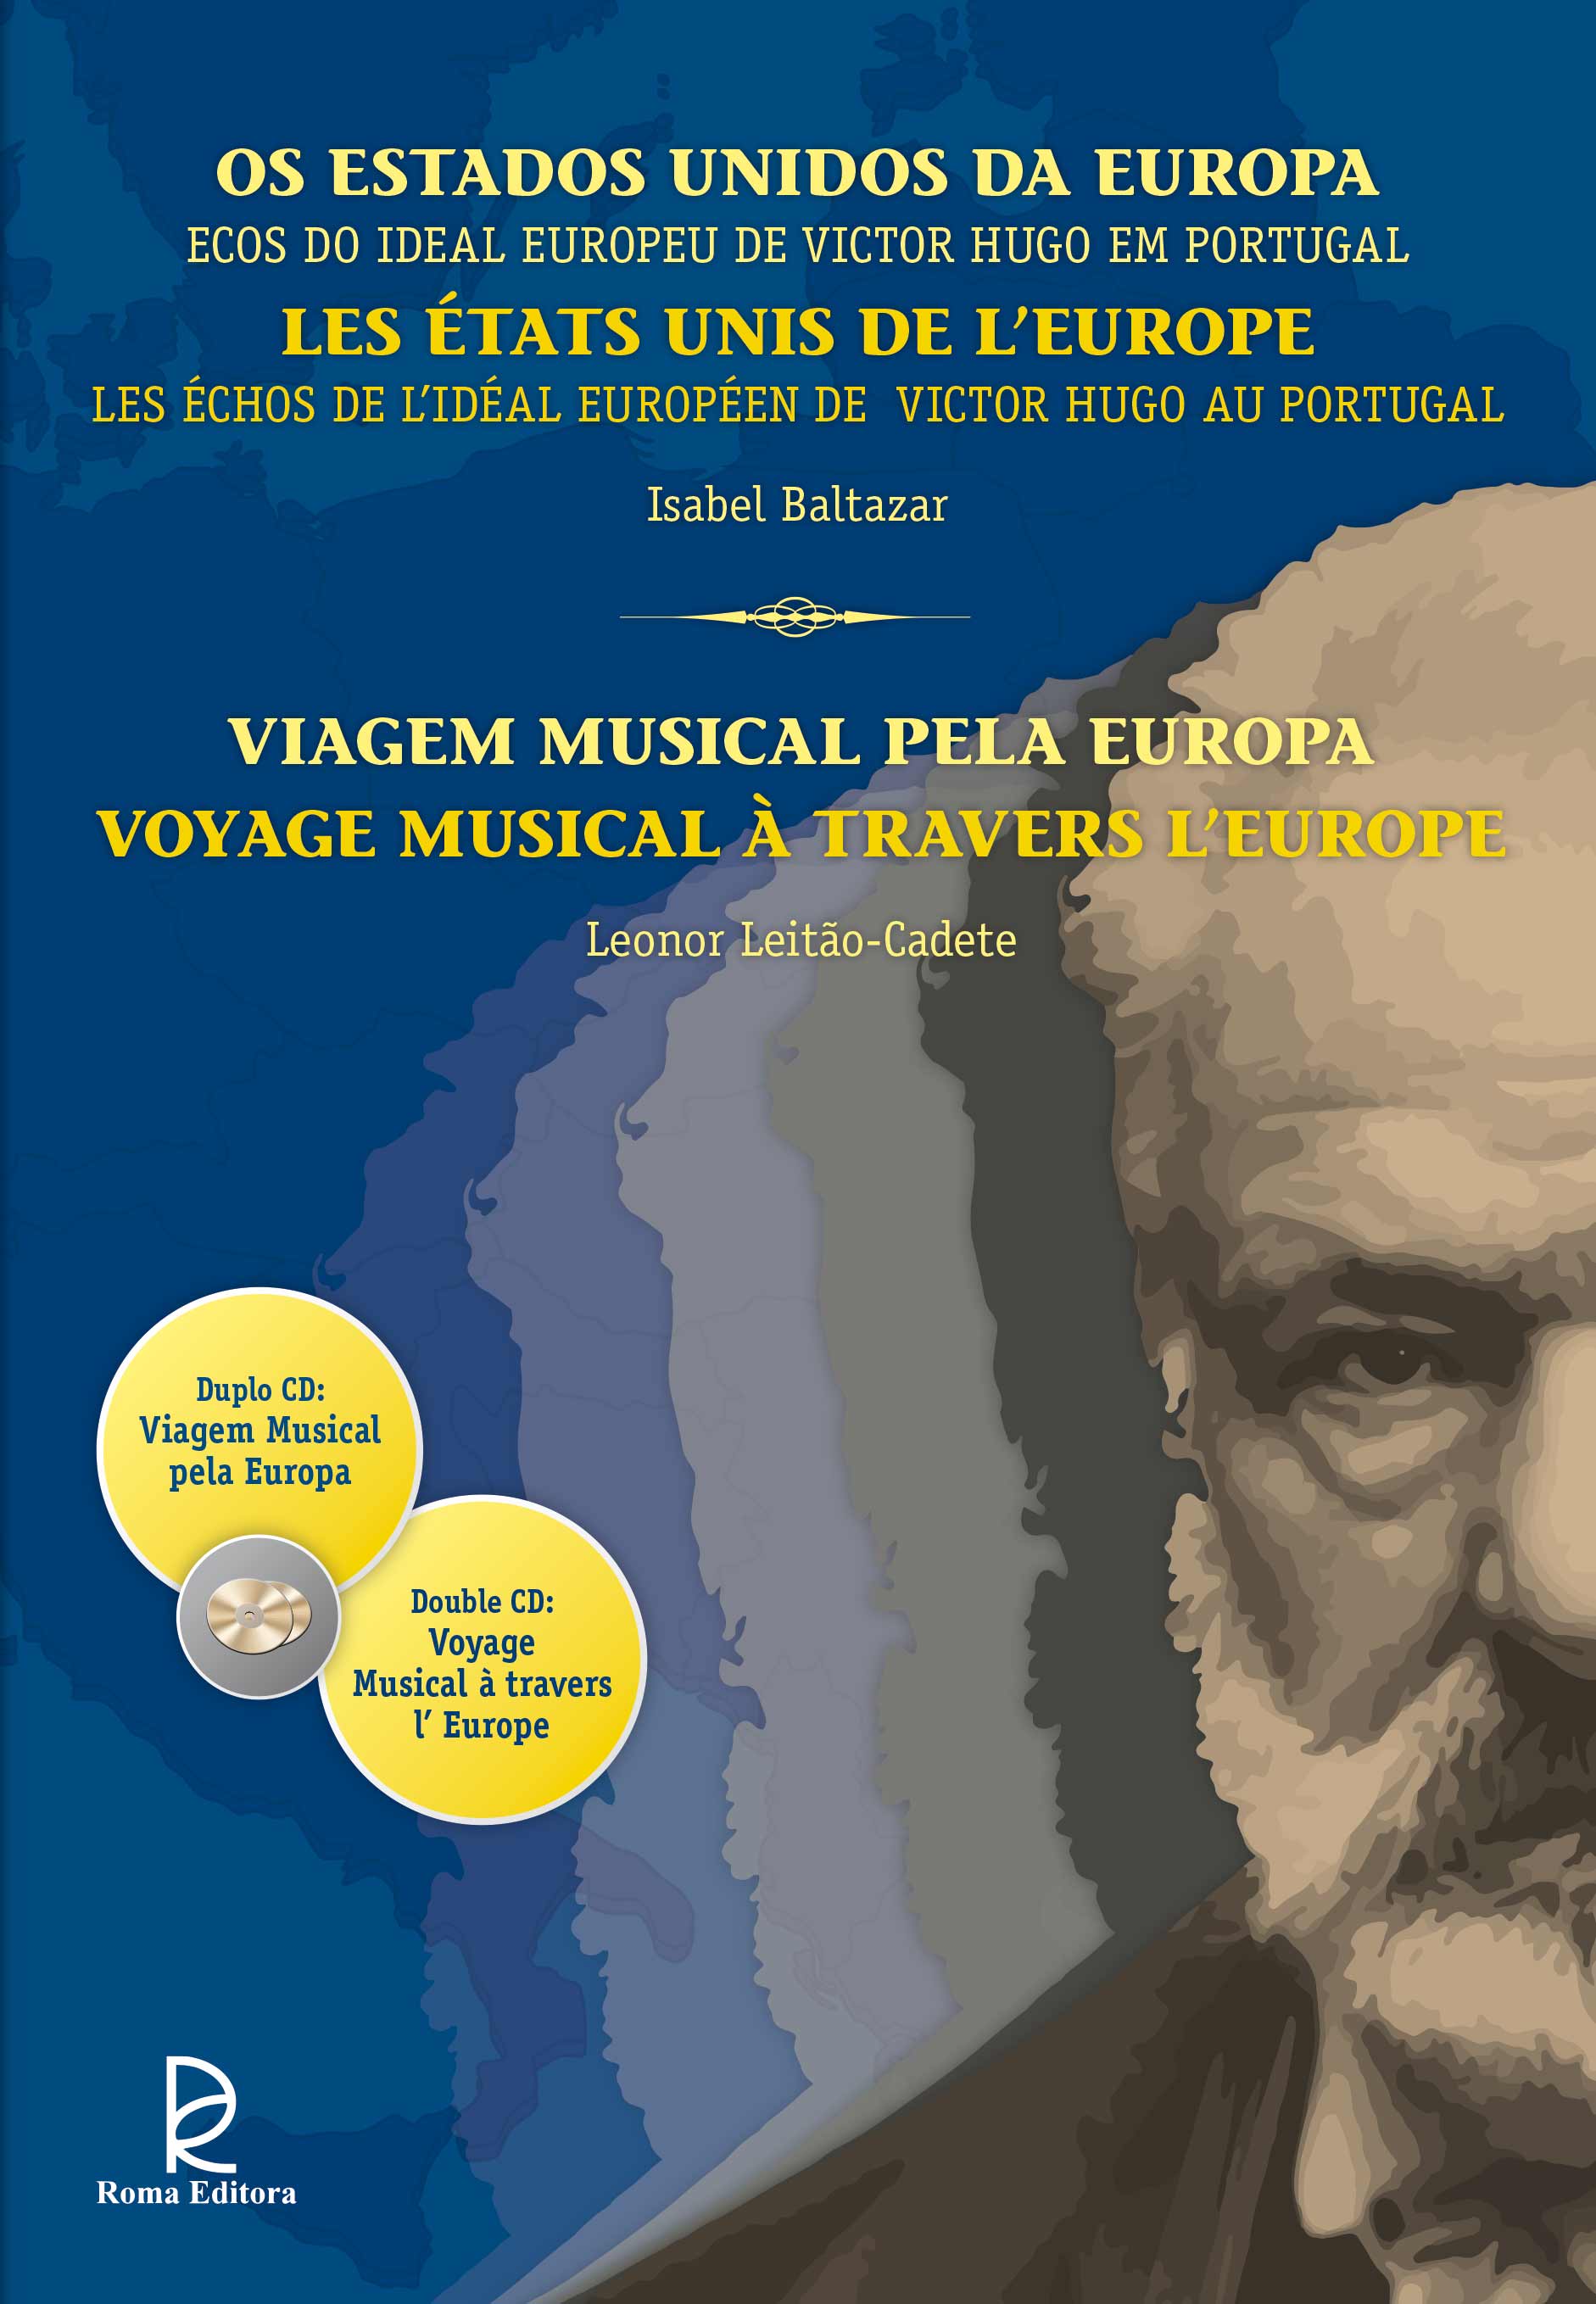 The United States of Europe - Echoes of the European ideal of Victor Hugo in Portugal